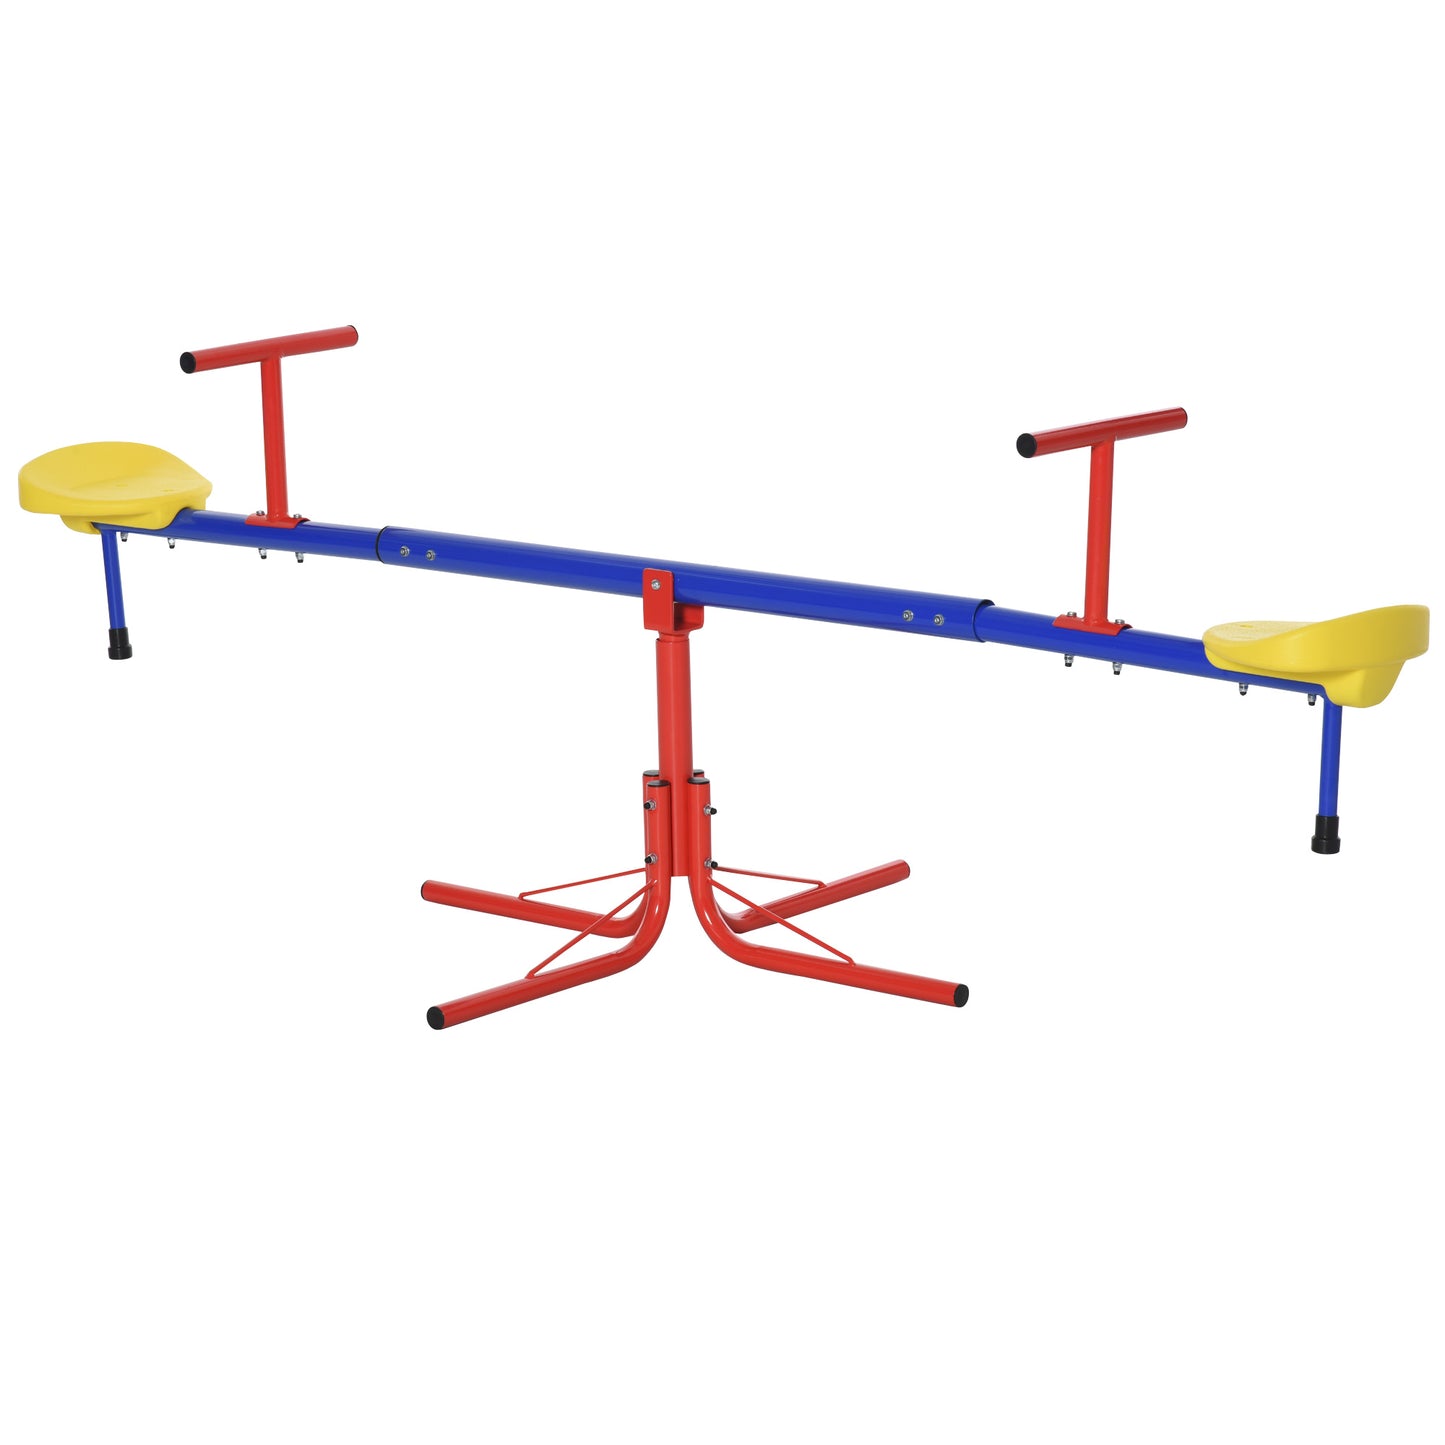 Outsunny Kids 360 Degree Rotating Metal Seesaw Swivel Teeter Totter Outdoor Toys